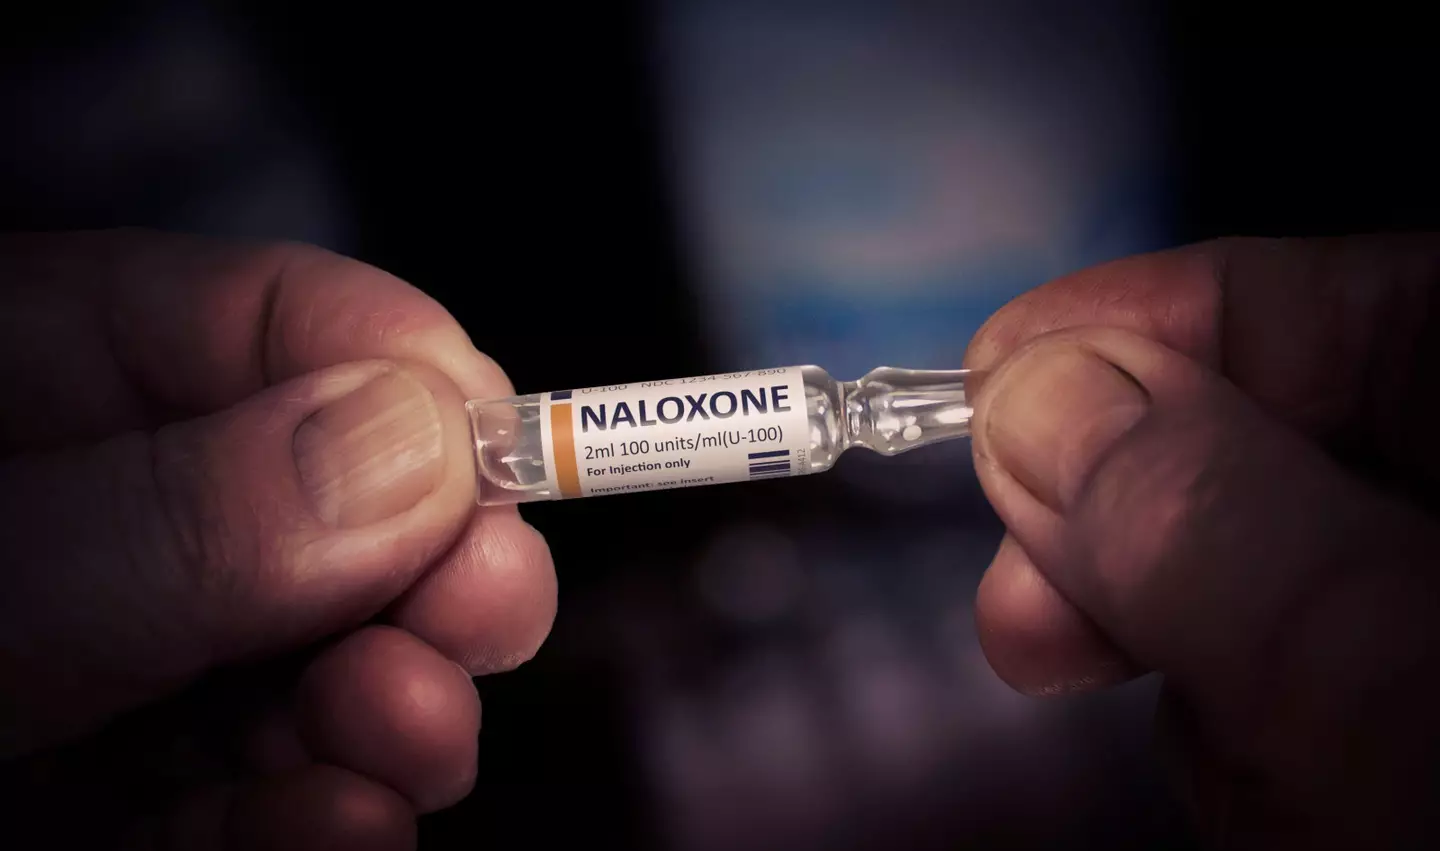 Naloxone - used to reverse the effects of an opioid overdose - does not work against xylazine.